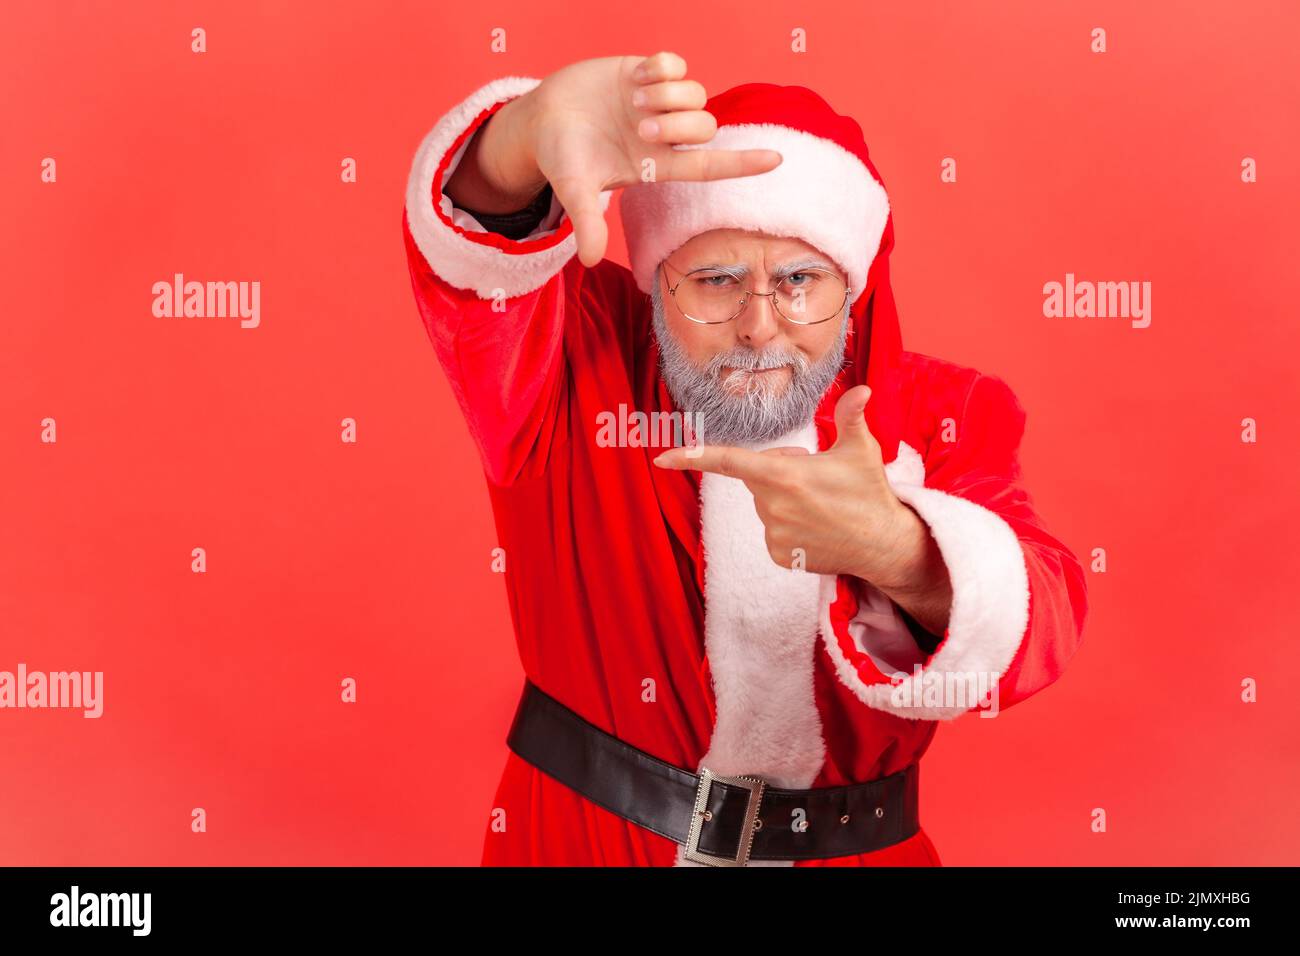 Elderly man in santa claus costume gesturing picture frame with hands, looking through fingers and focusing on interesting moment, taking photo. Indoor studio shot isolated on red background. Stock Photo